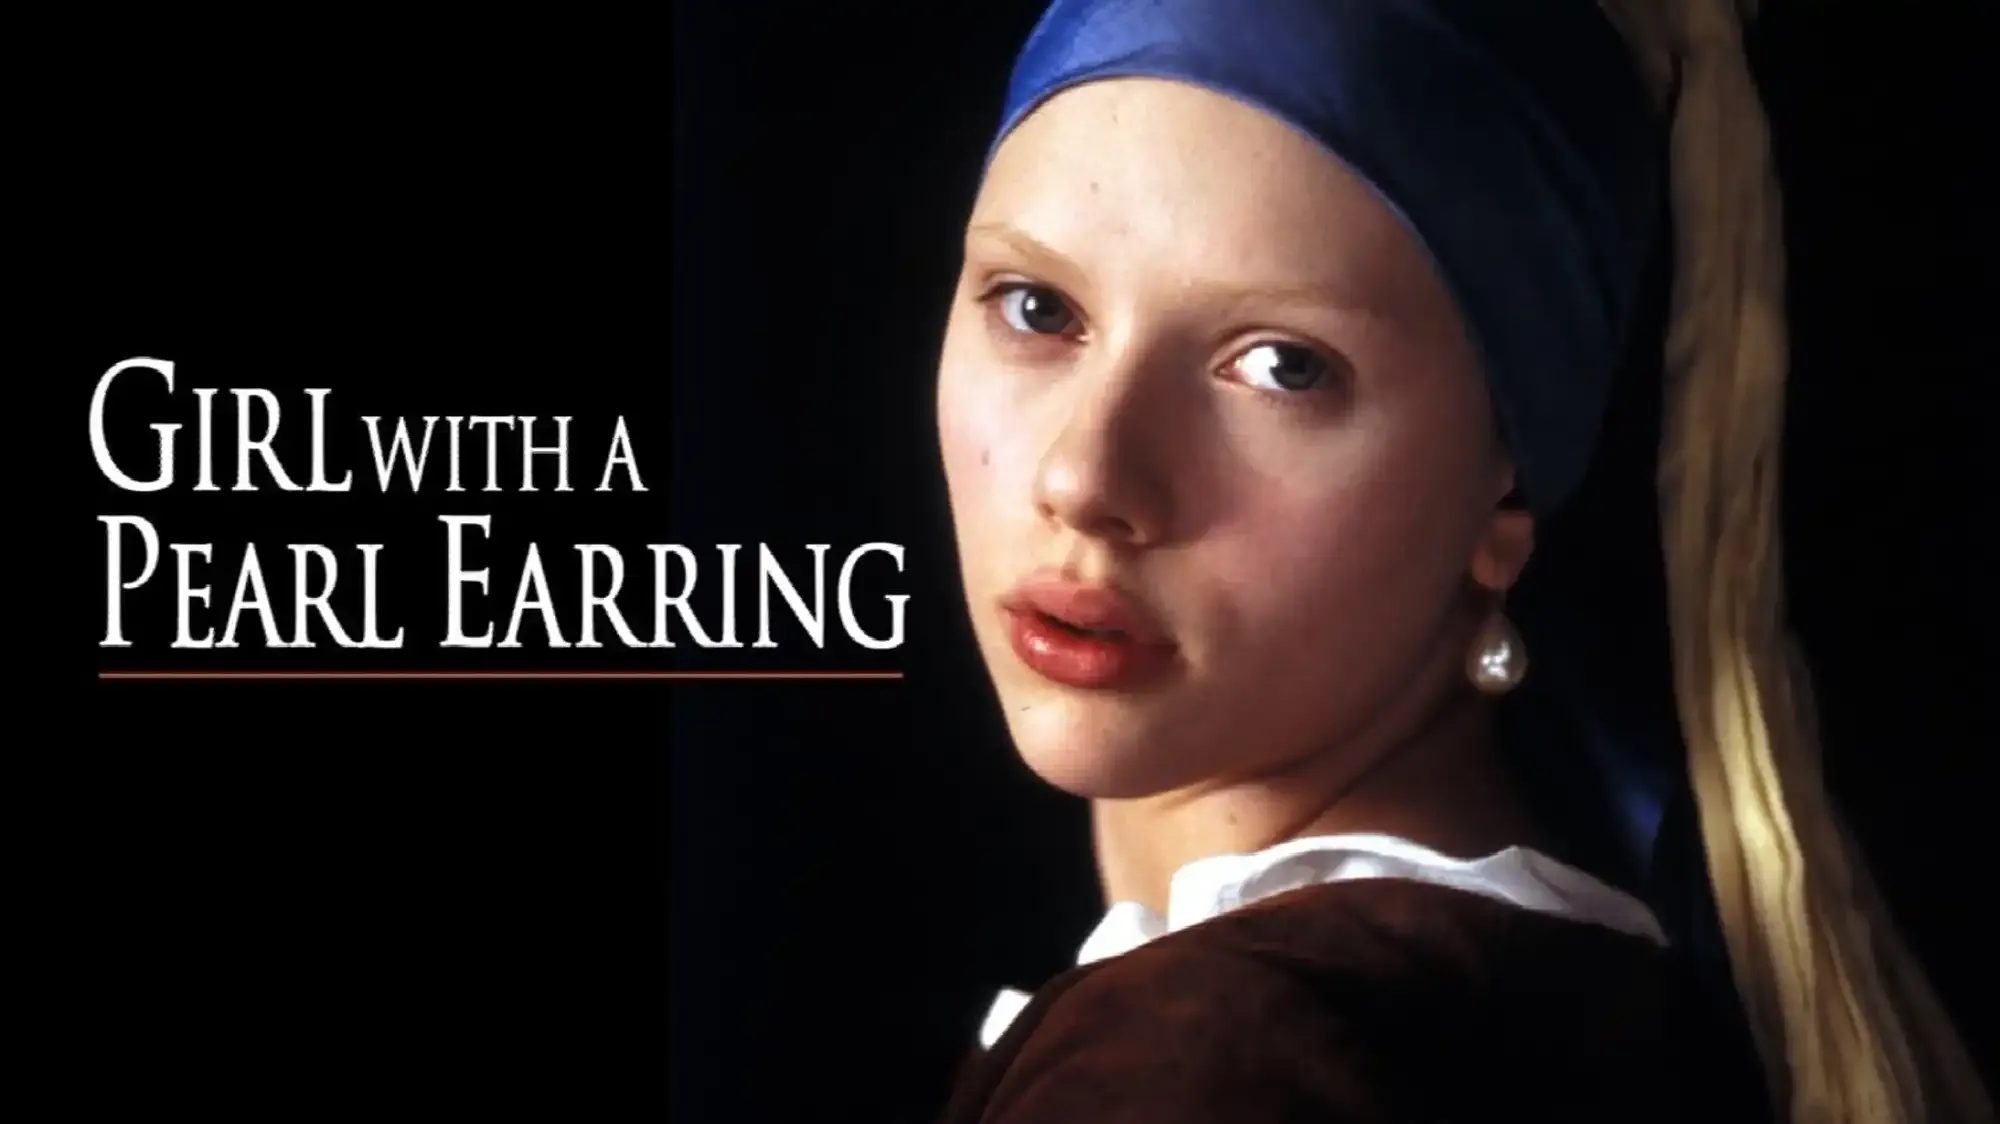 Girl with a Pearl Earring movie review